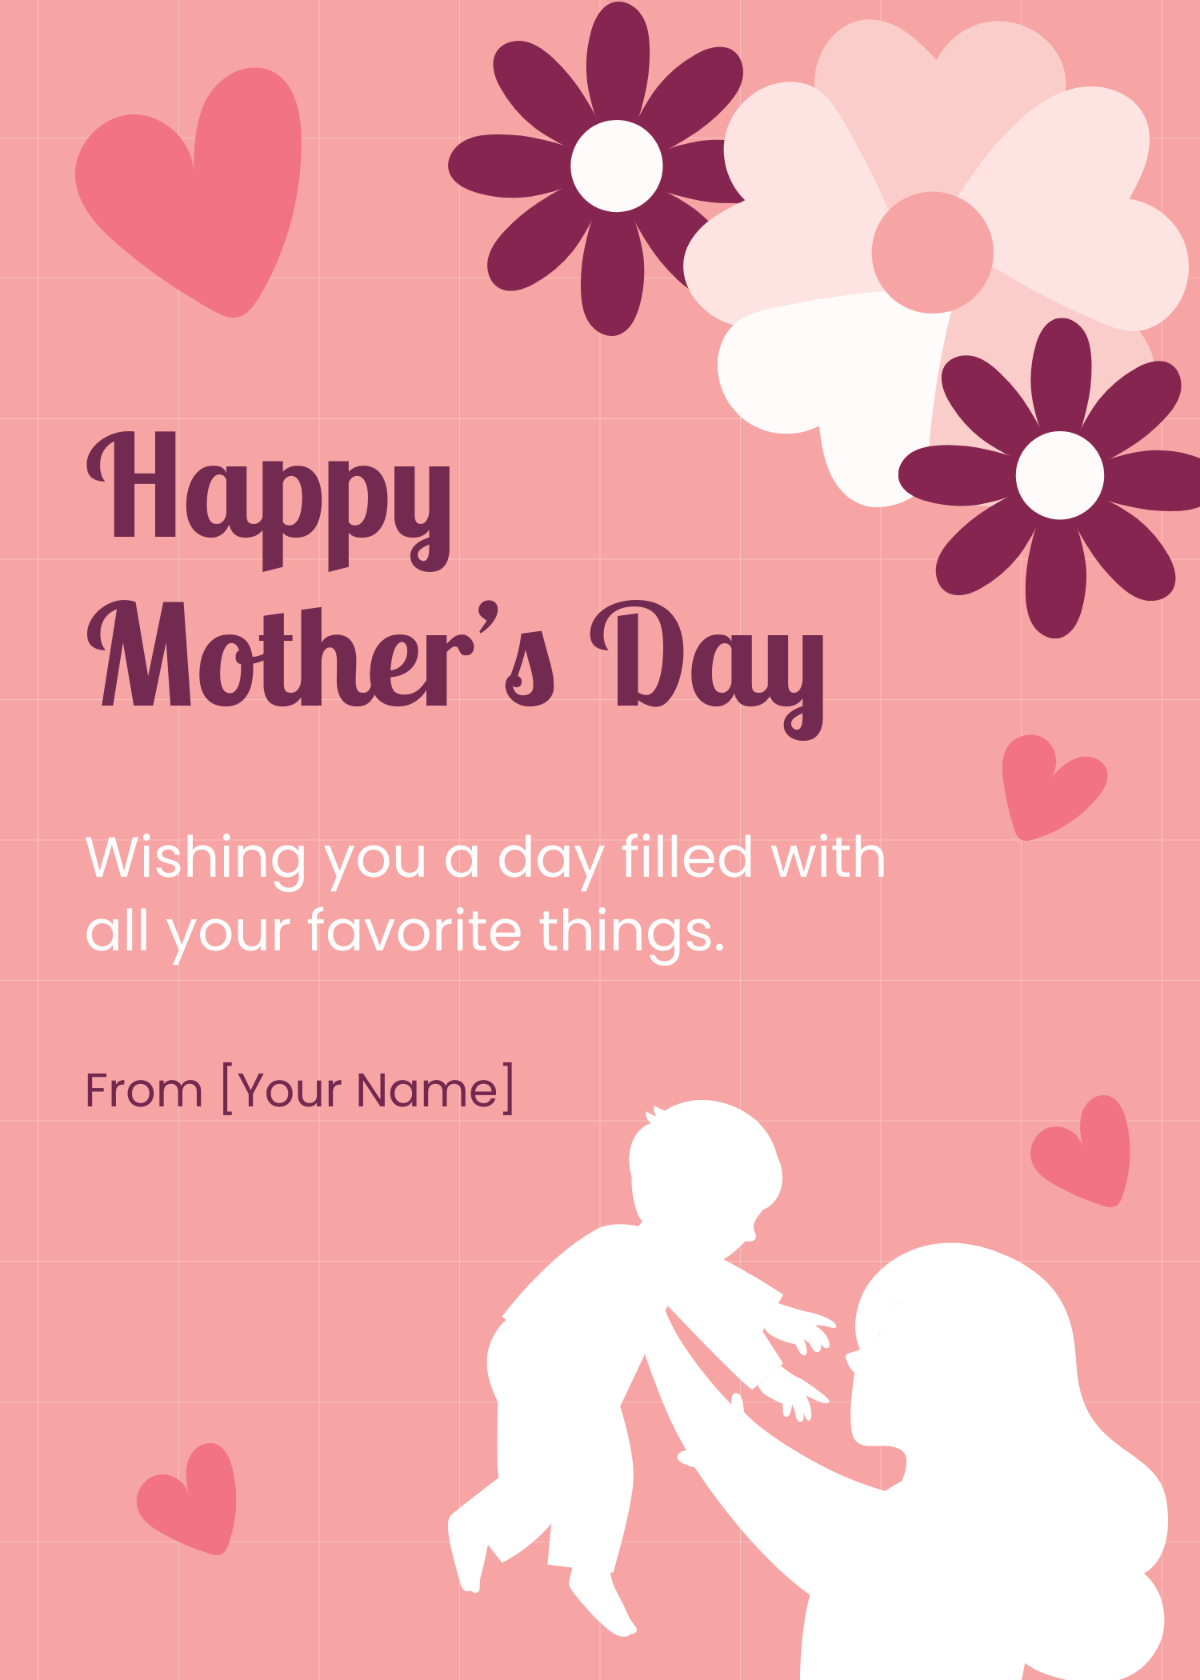 Mother's Day Wishes